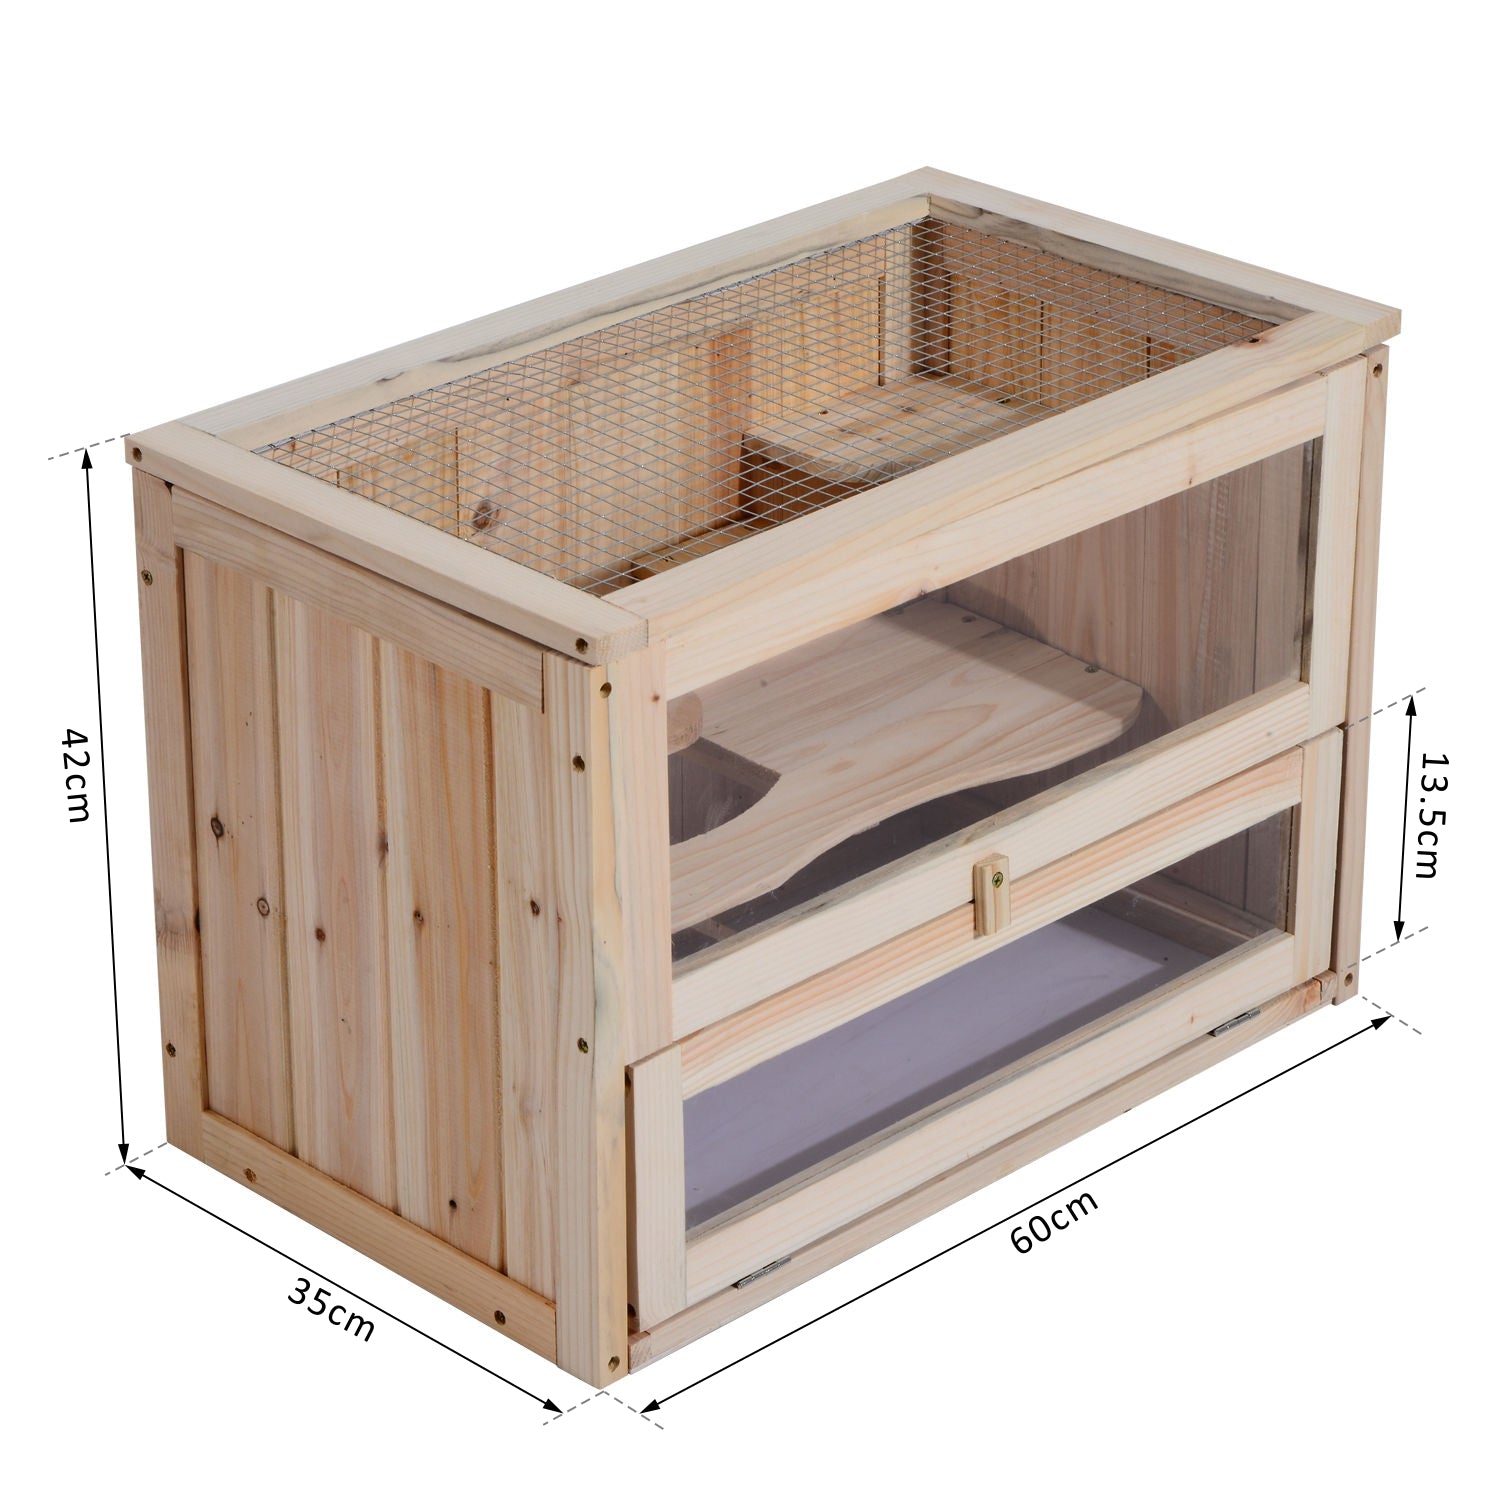 Fir Wood Hamster Cage Suitable for Small Rodent Animals